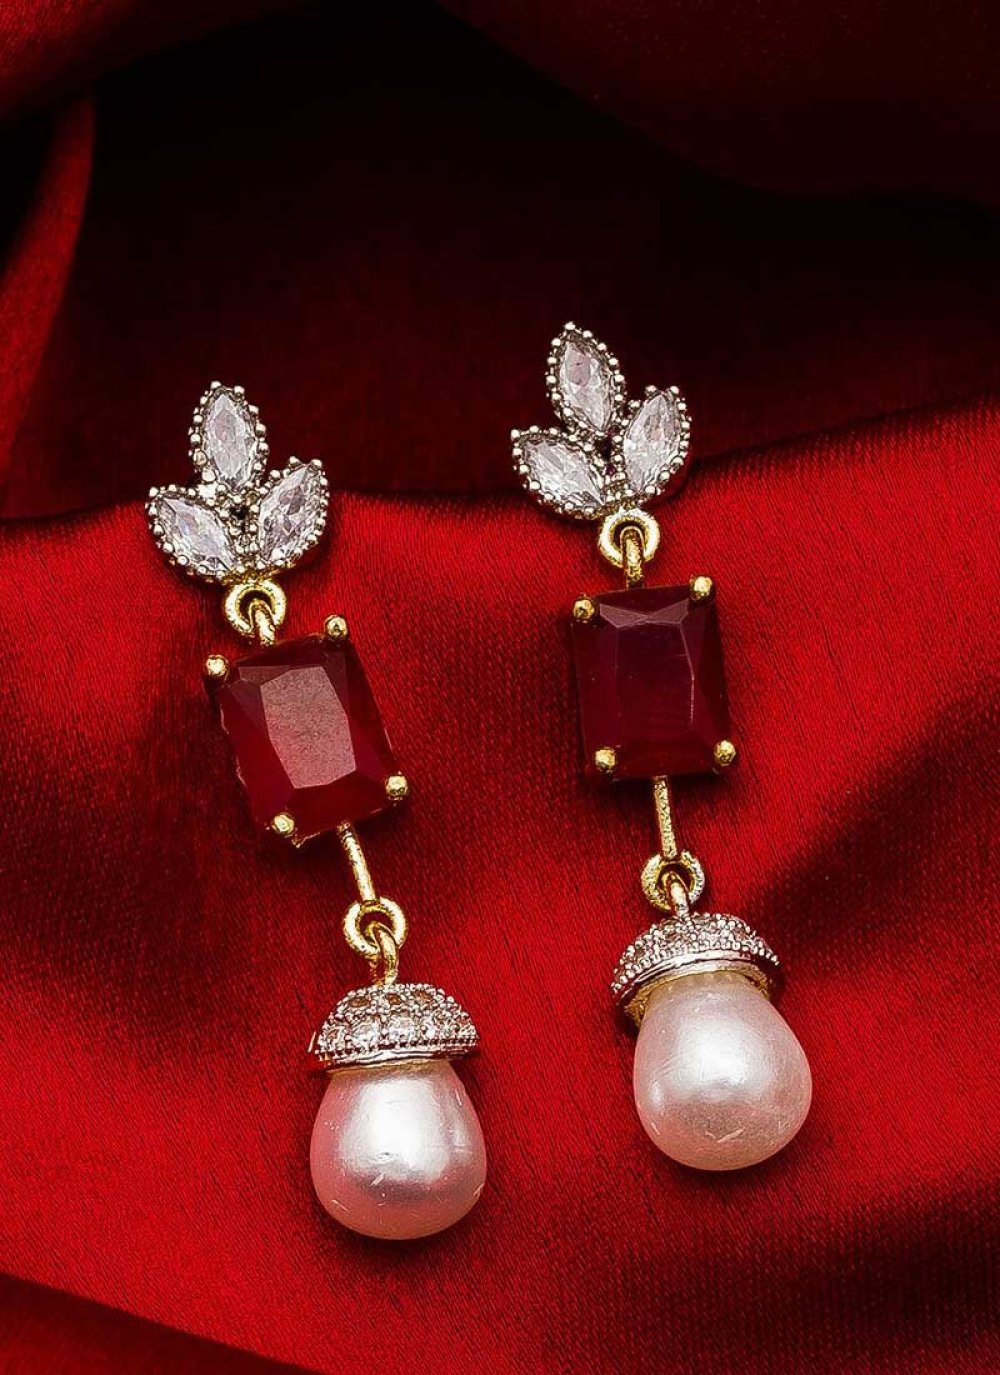 Outstanding Maroon and White Alloy Gold Rodium Polish Earrings For Festival